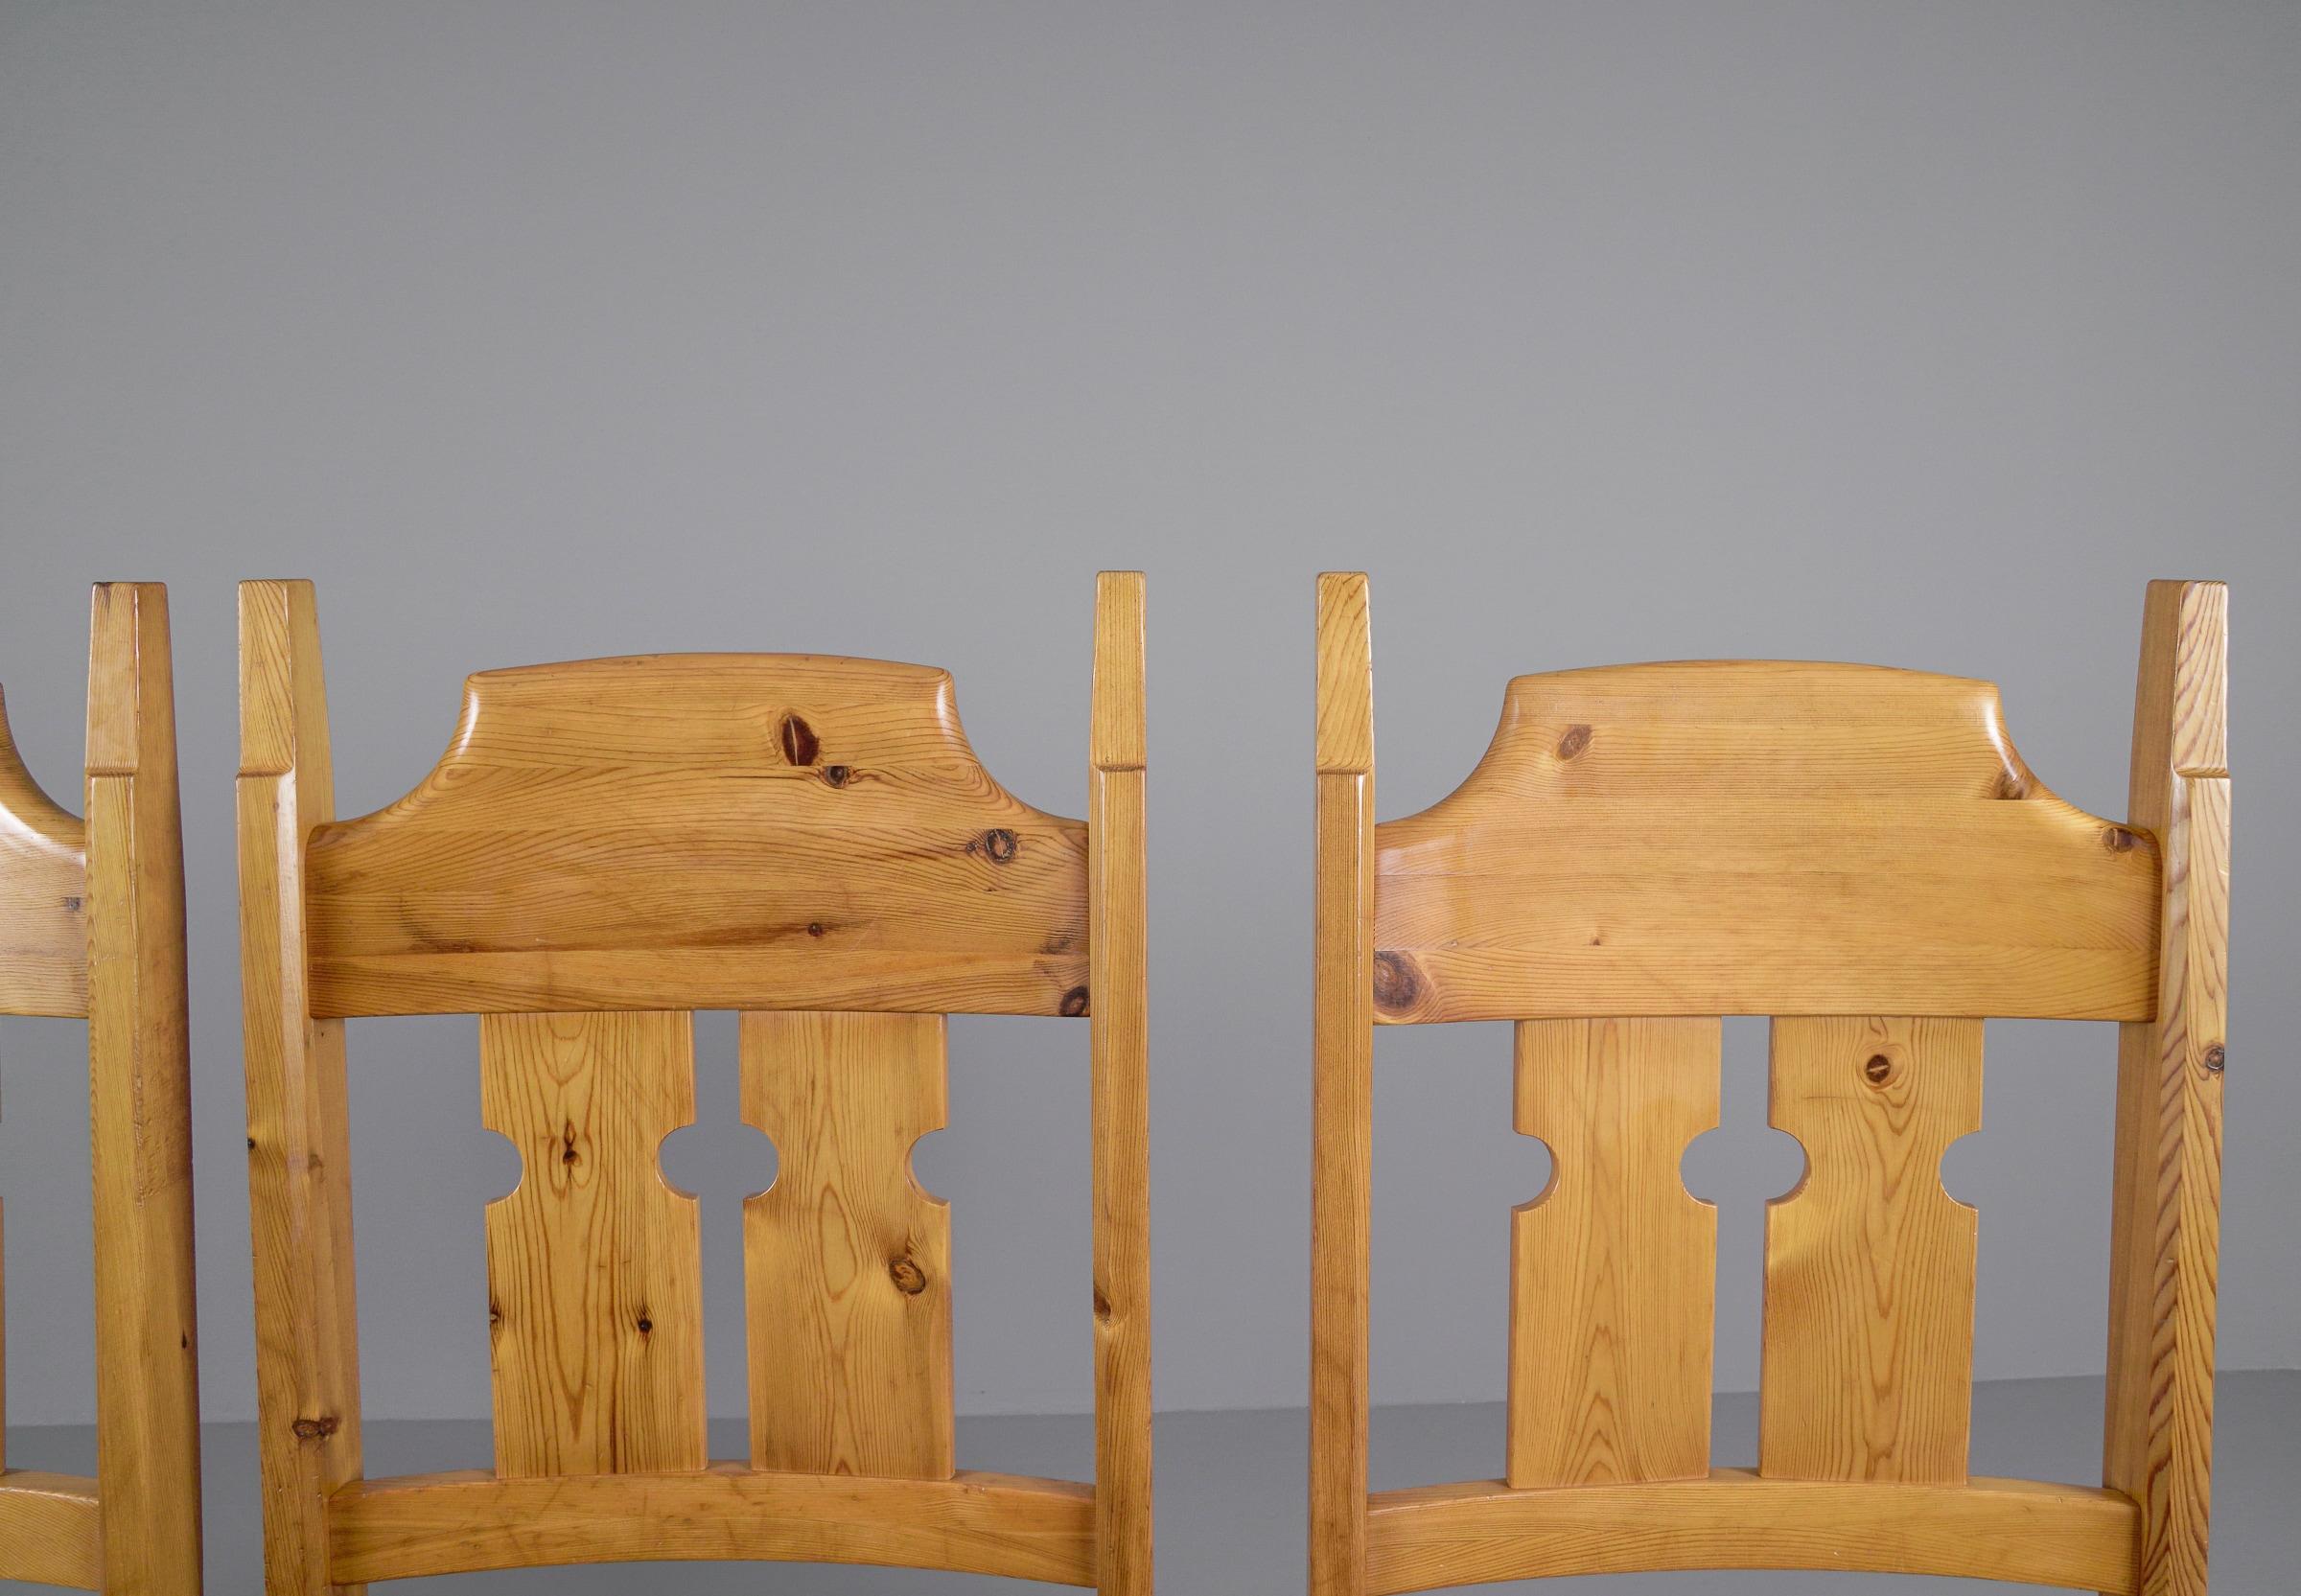  Set of 4 Swedish Pine Chairs by Gilbert Marklund for Furusnickarn AB, 1970s For Sale 3